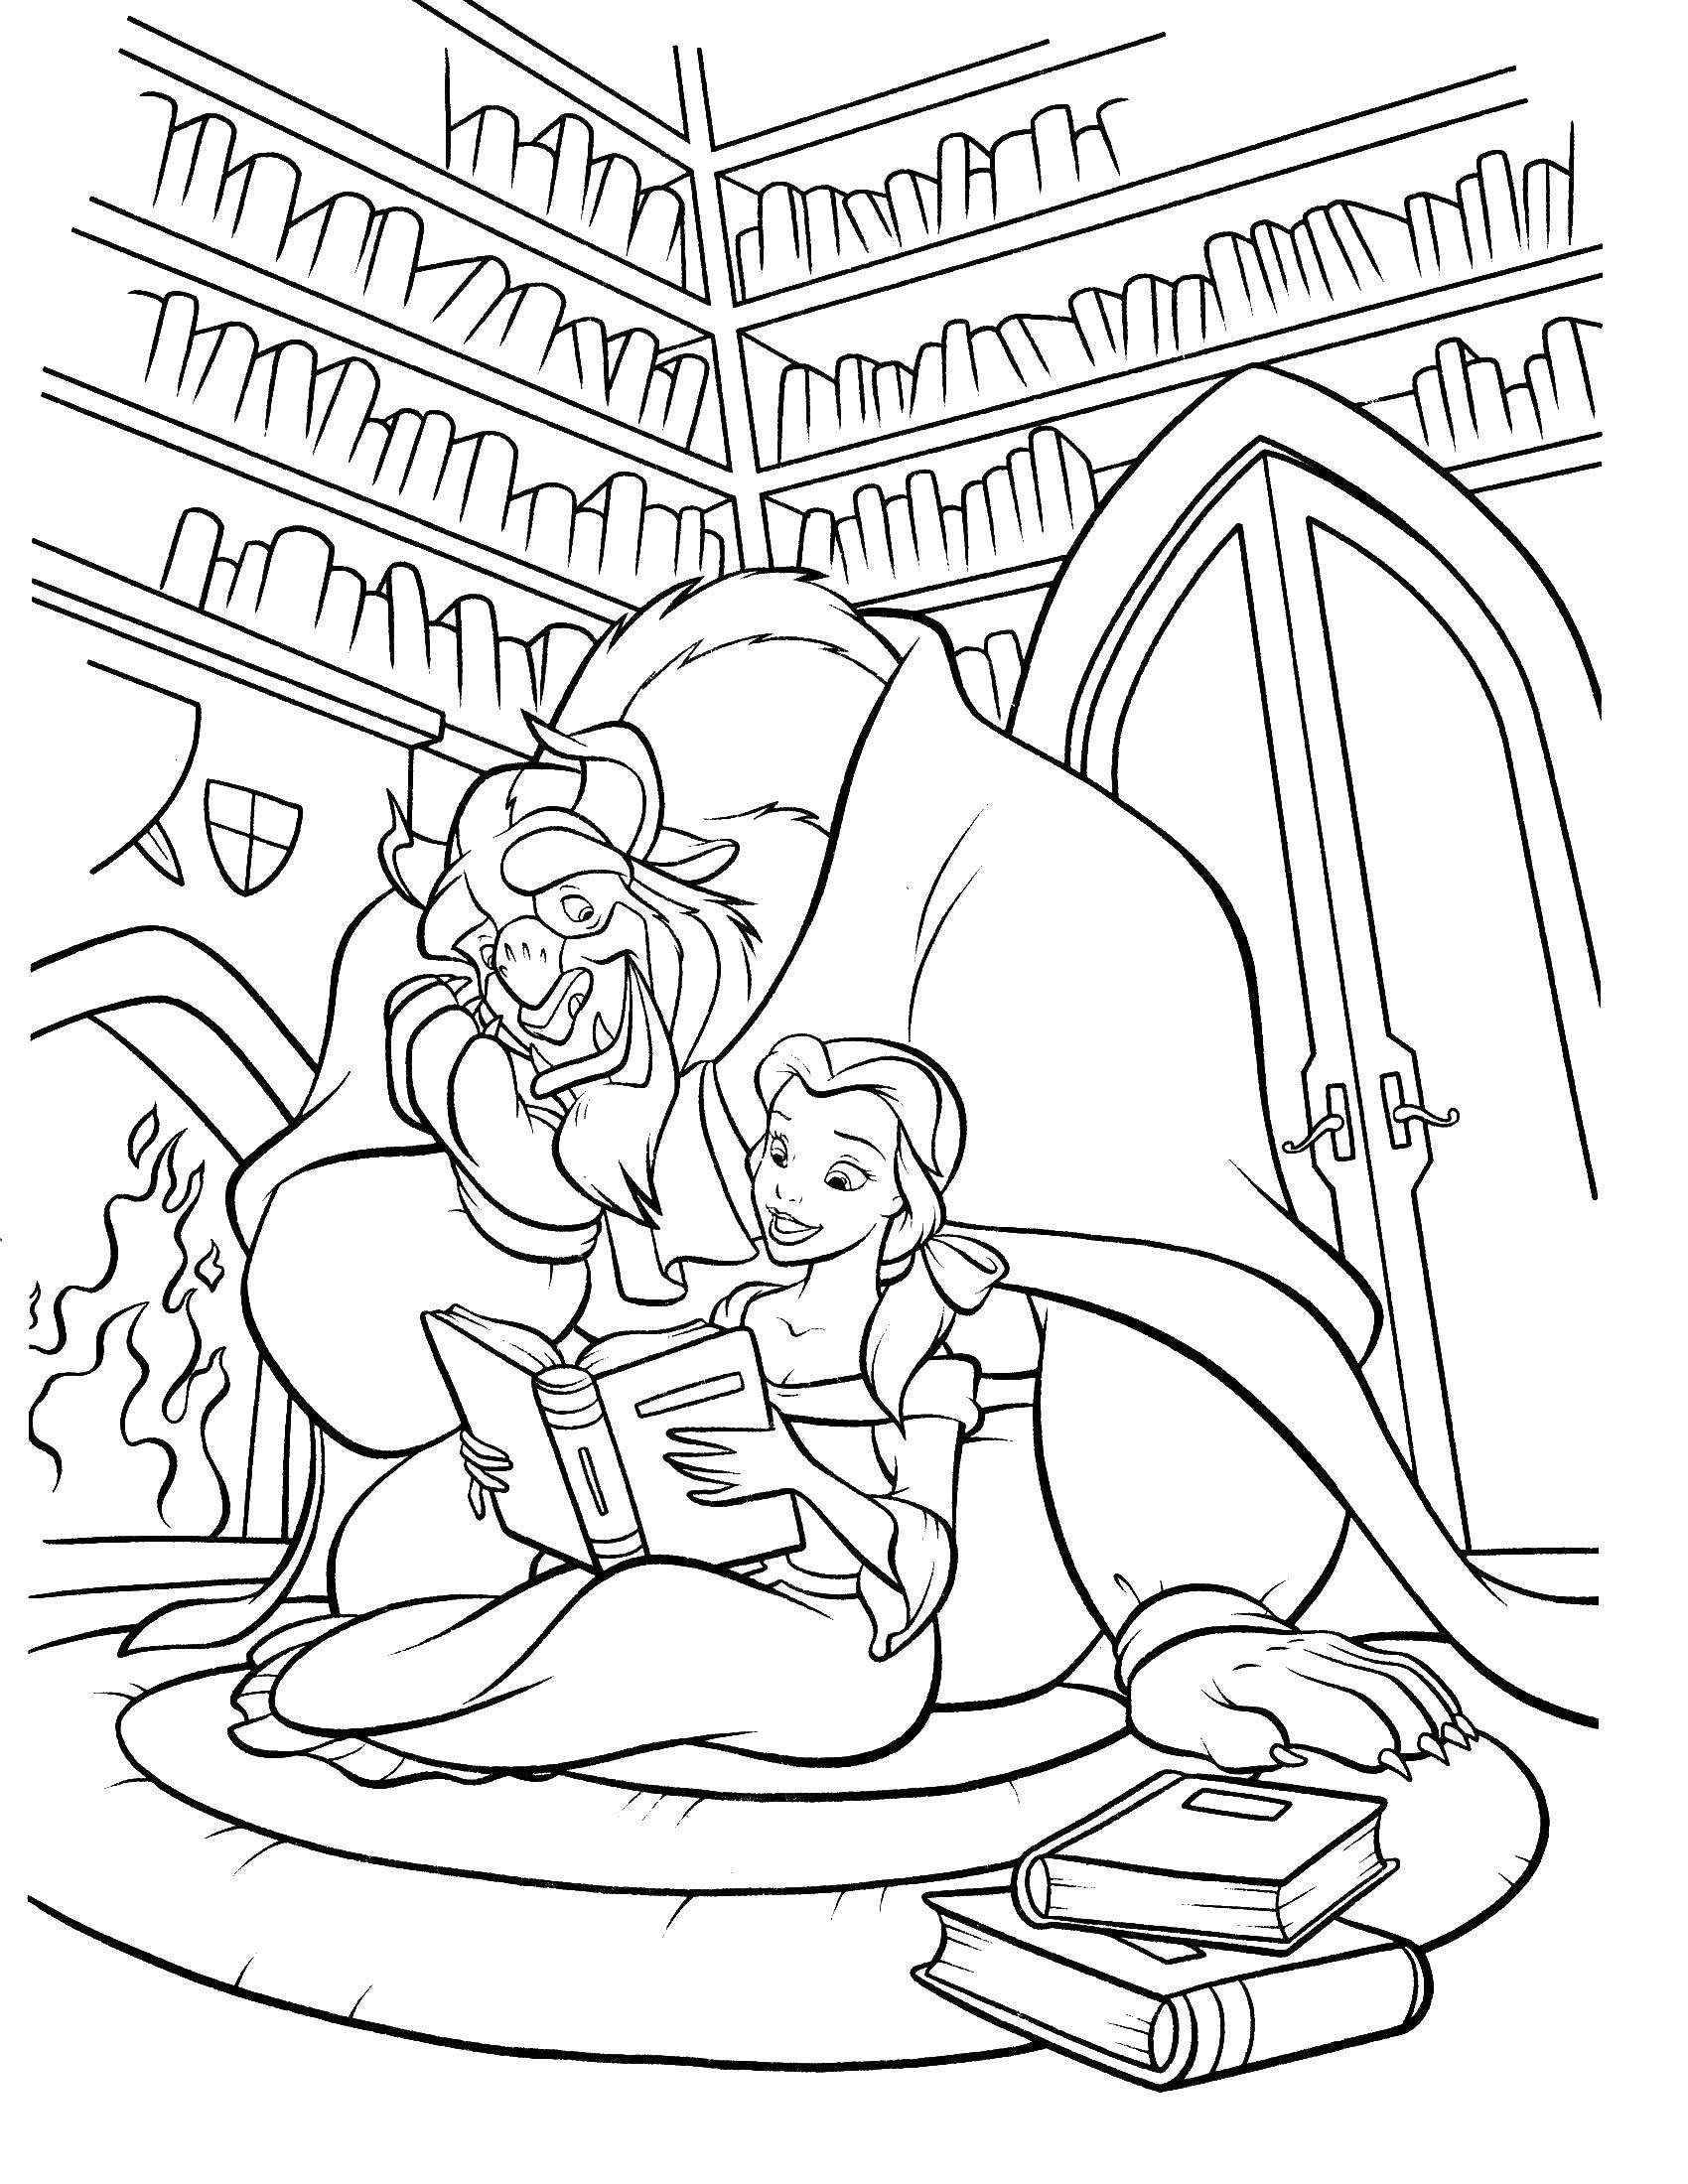 Coloring Beauty Belle and the beast read along Unigo. Category beauty and the beast. Tags:  beautiful , monster.